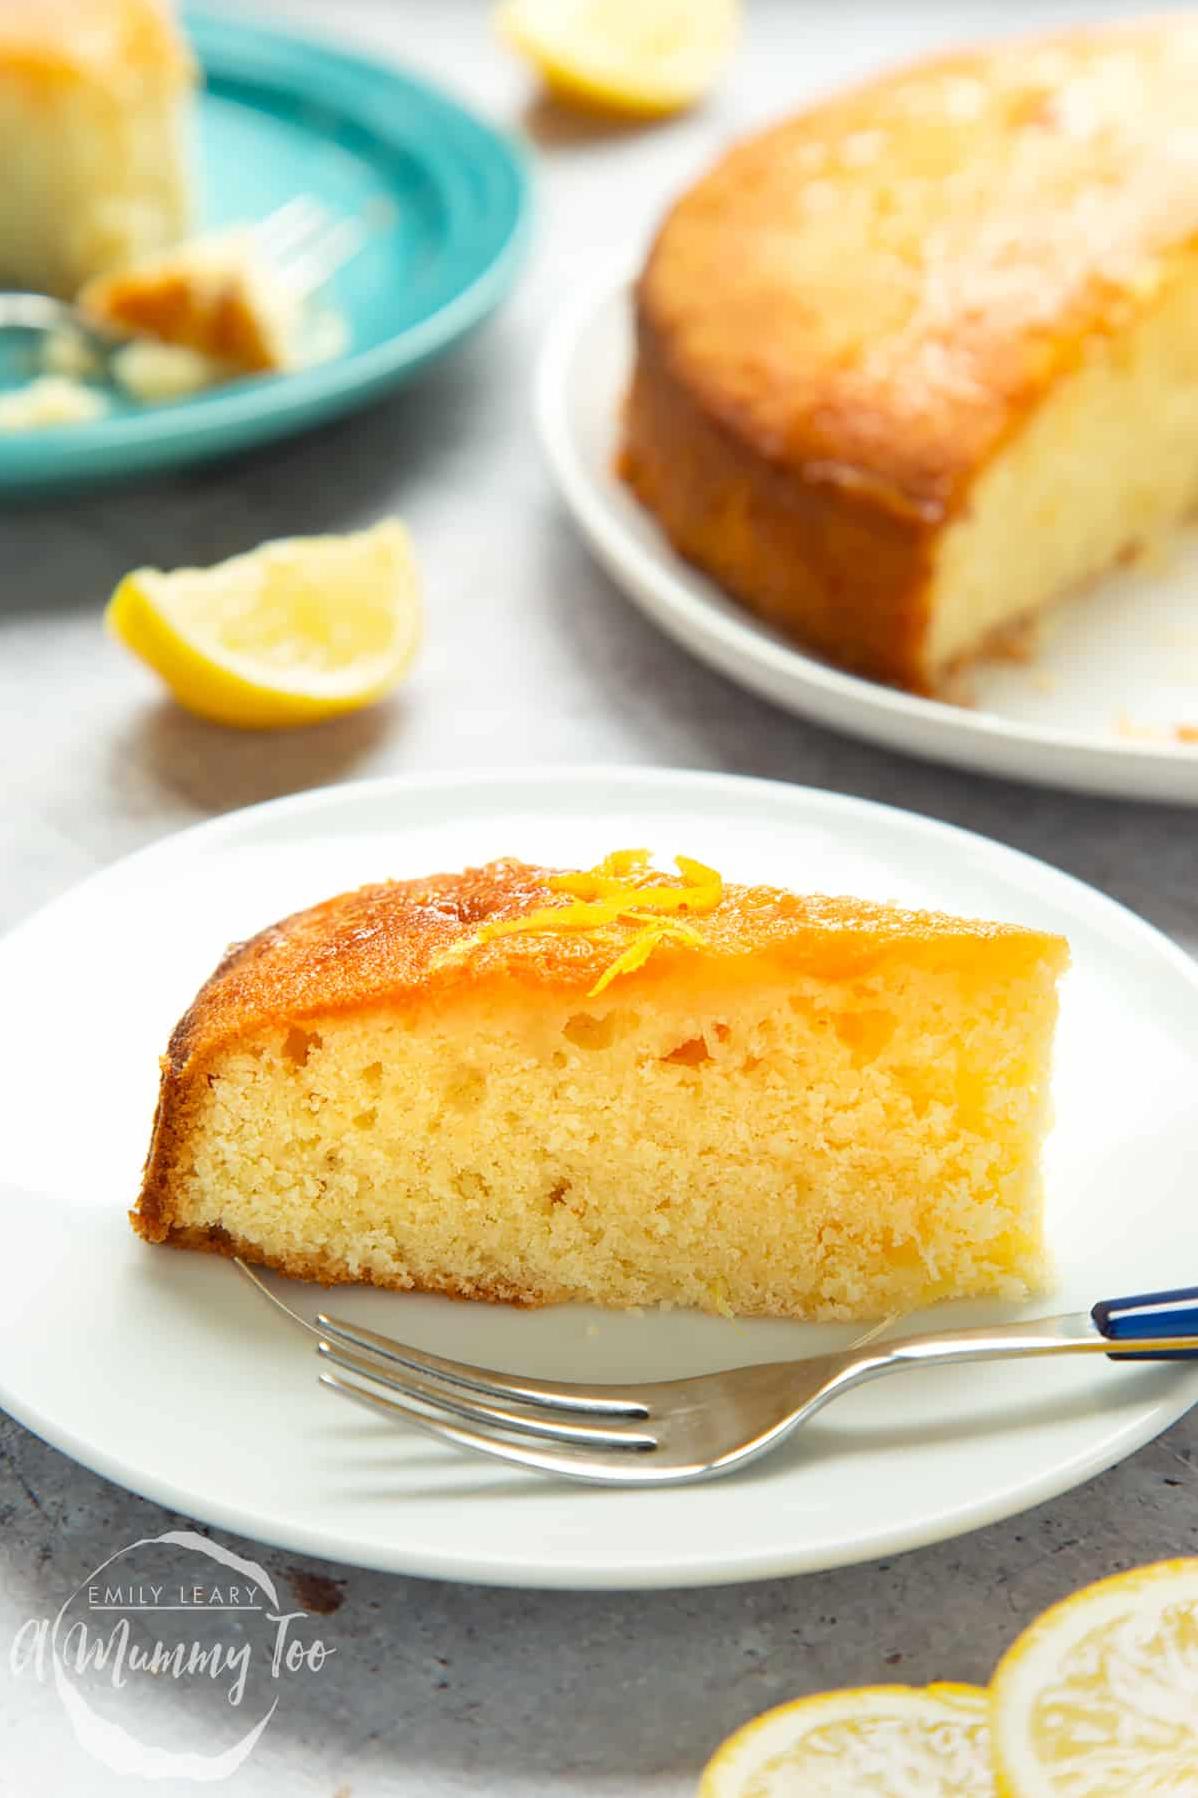  Brighten up your day with a slice of English Lemon Cake.